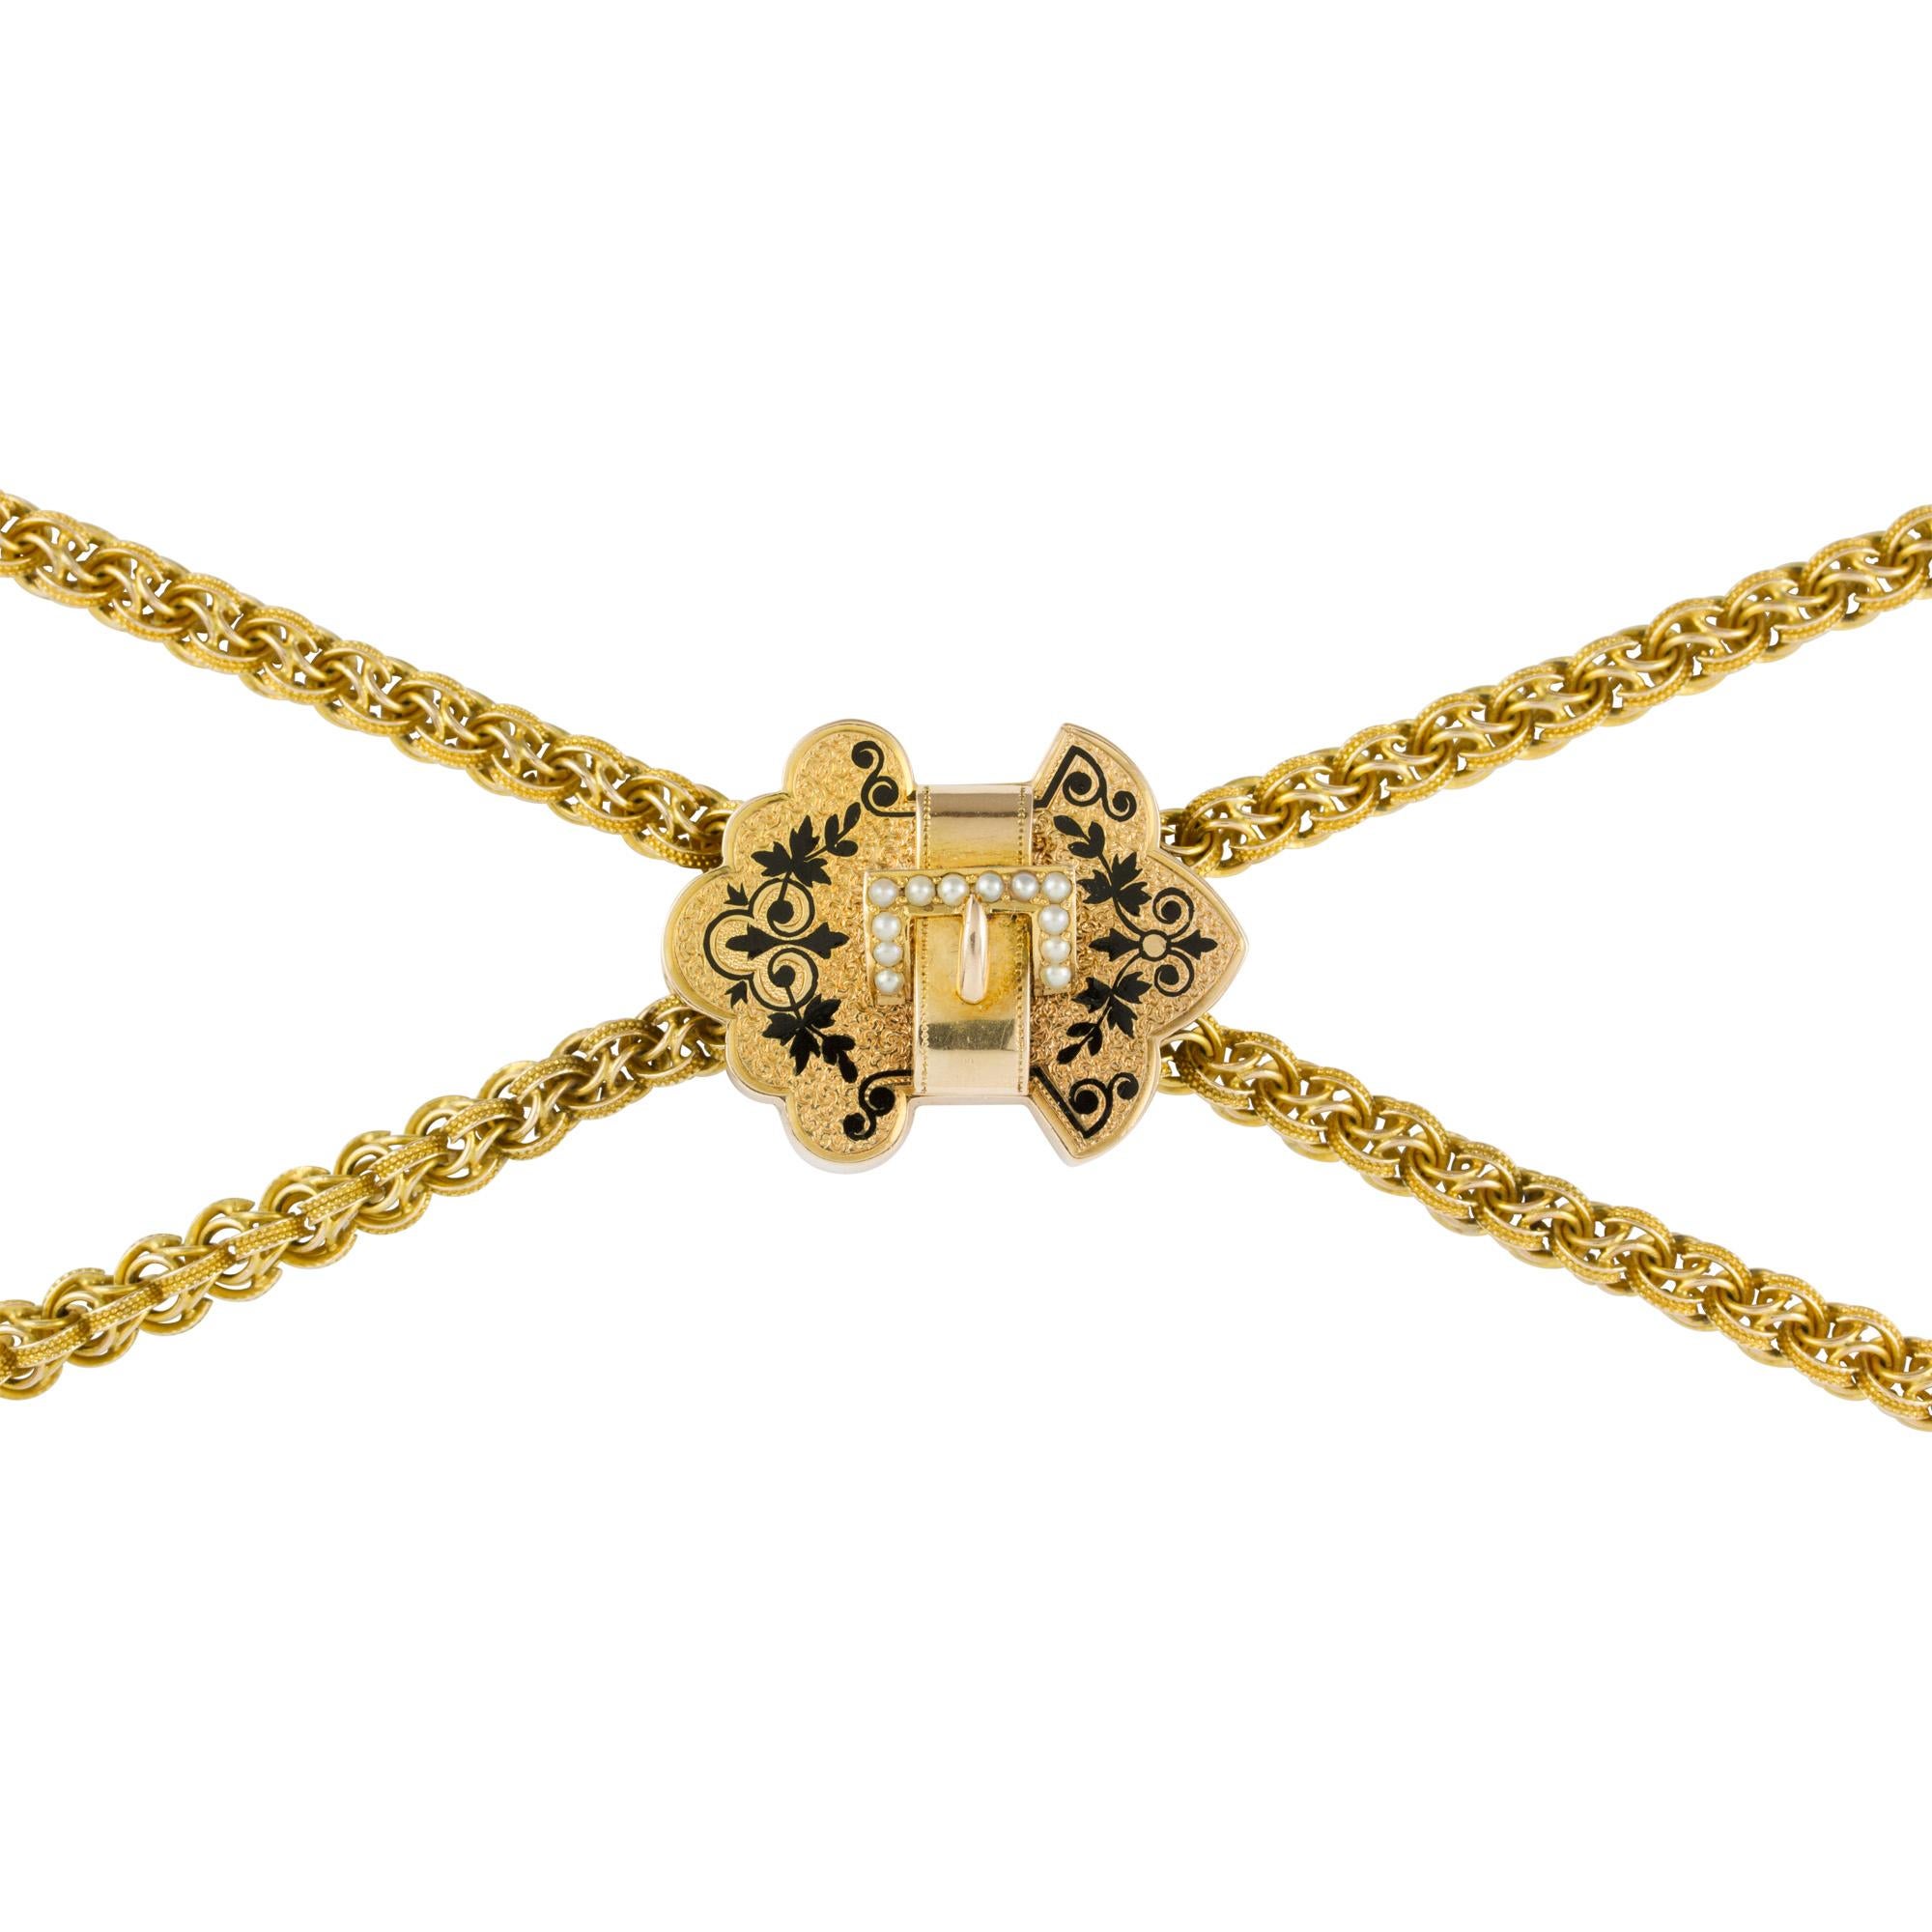 A Victorian long chain and slide, the chain of an interlocked double-link style measuring approximately 148 x 0.5cm, with an abstract slide attachment with enamel floral motif and buckle set with seed pearls, measuring approximately 2.9 x 2.2cm,